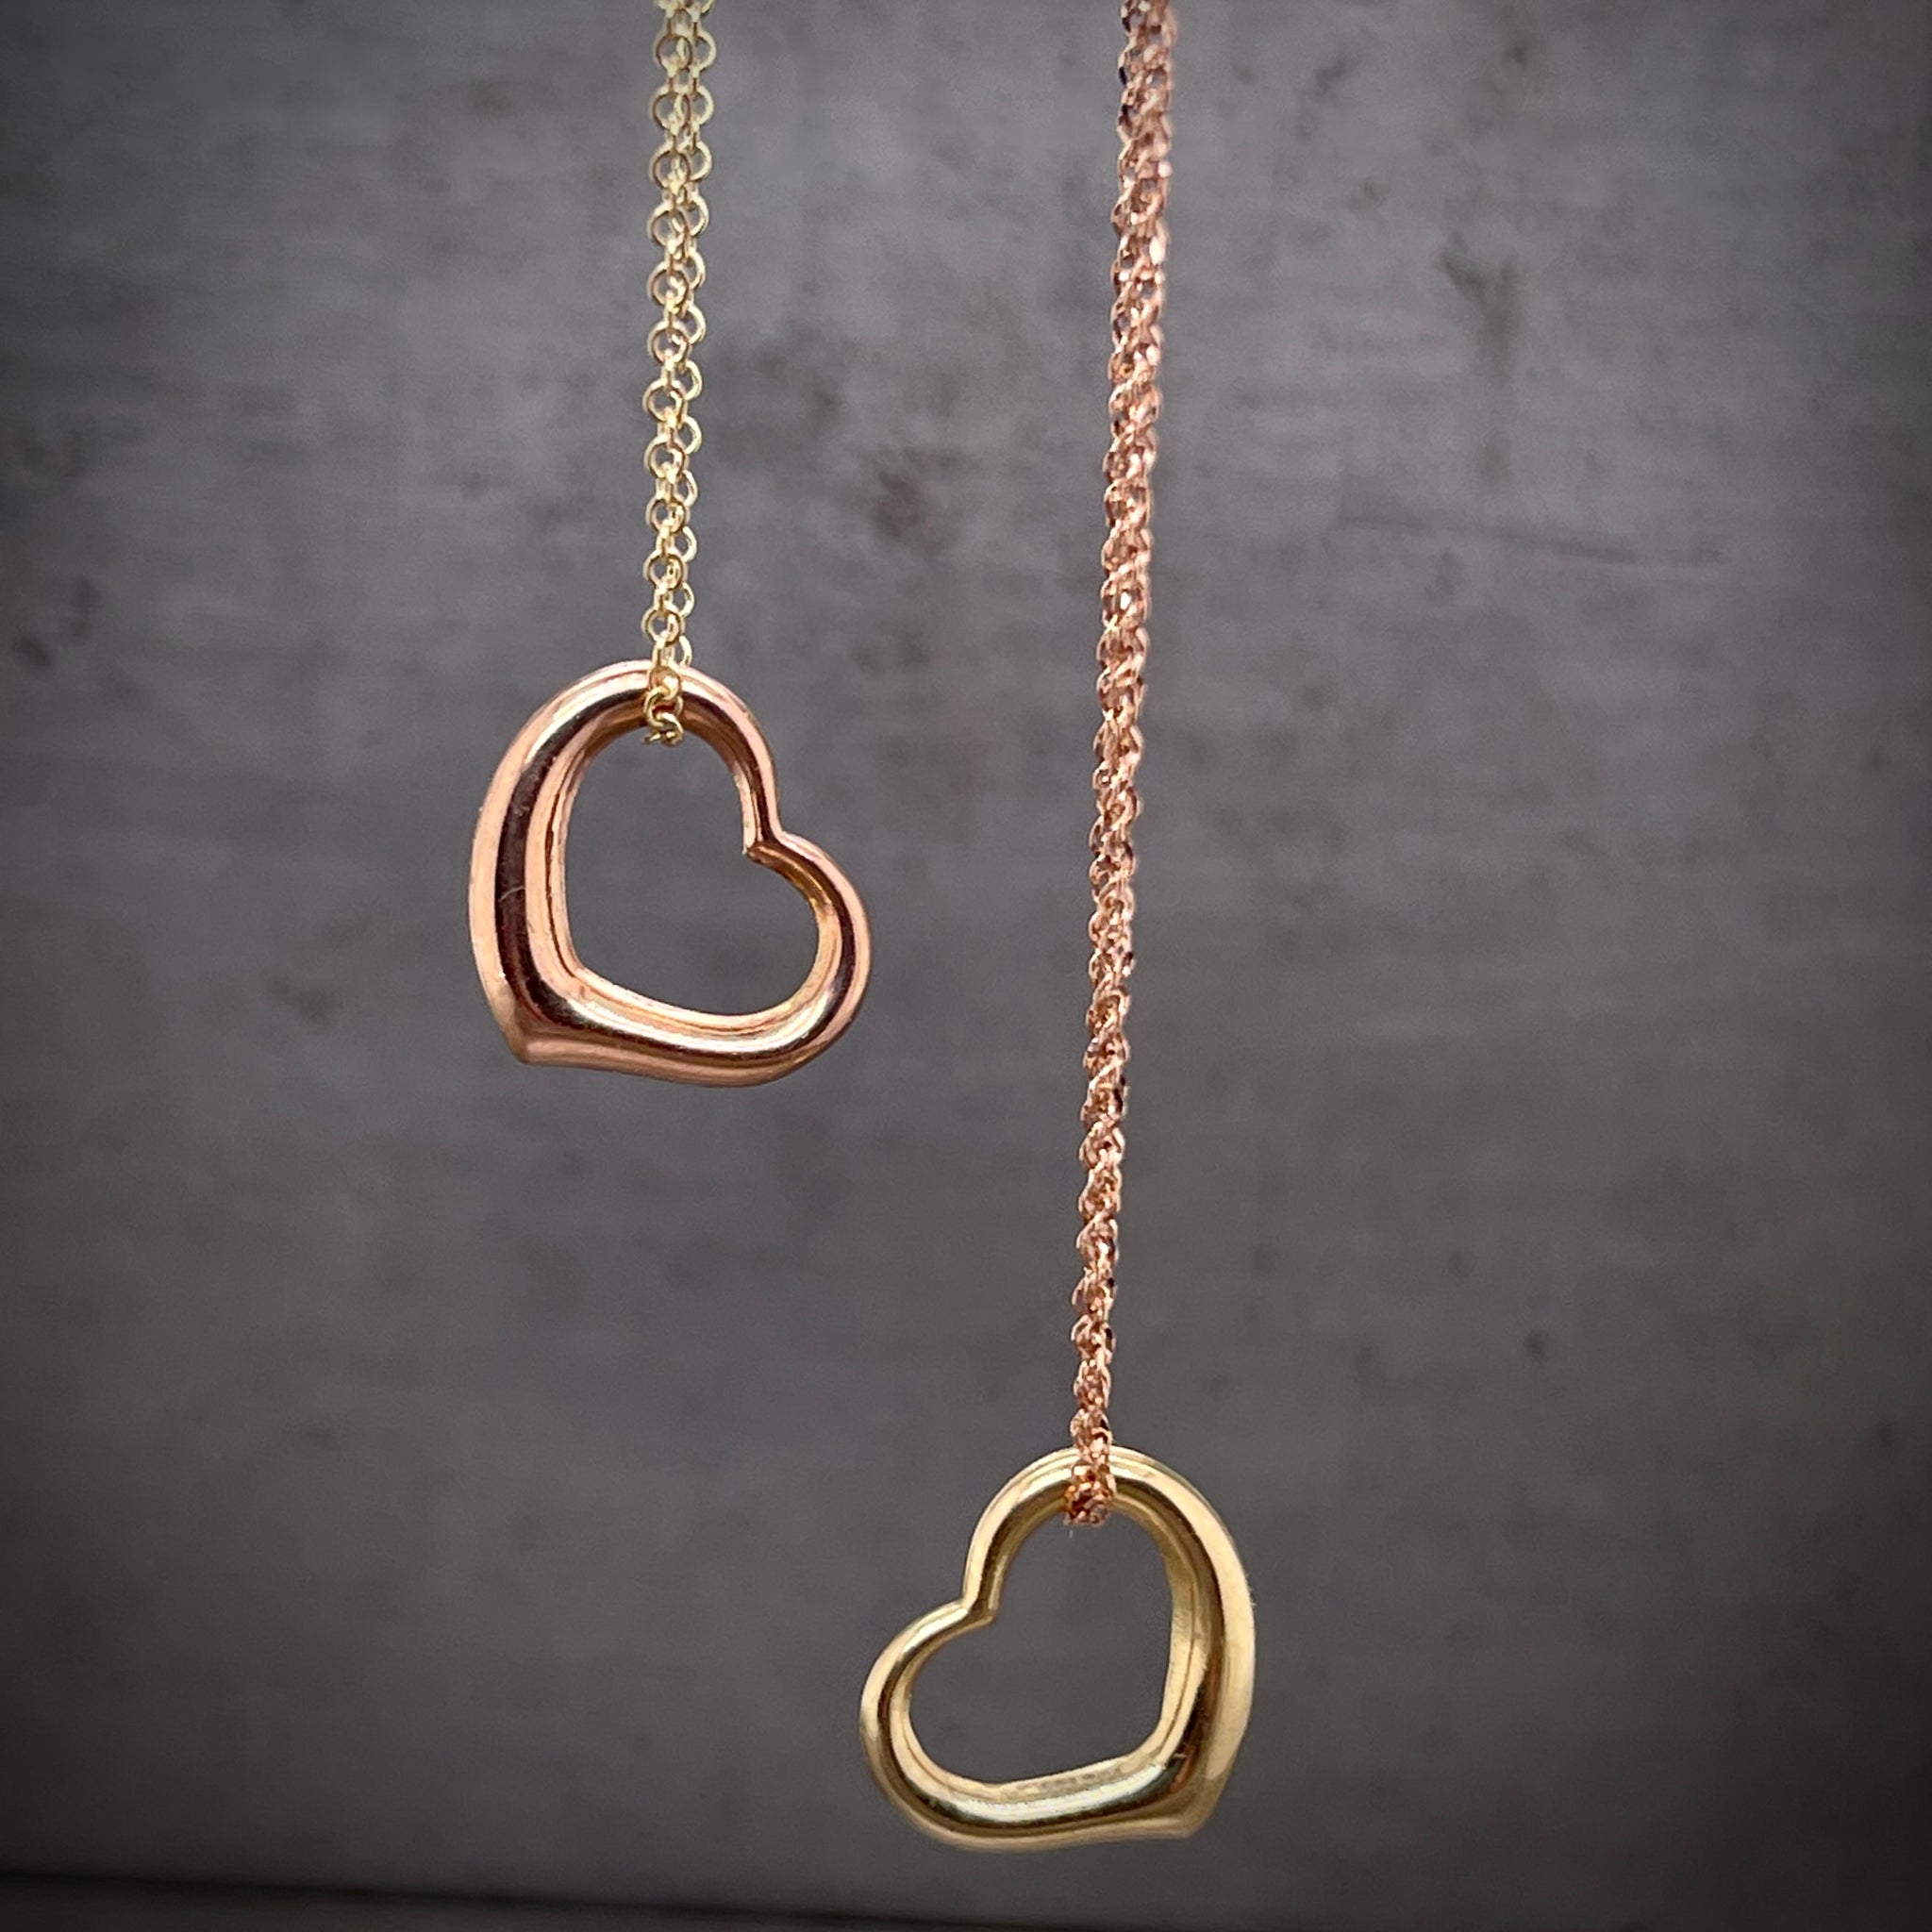 Close up image of two necklaces that each feature an asymmetrical heart pendant that slides on the chain. The necklace to the left features a yellow chain with a rose gold heart. The necklace to the right features a rose gold chain and a yellow heart.